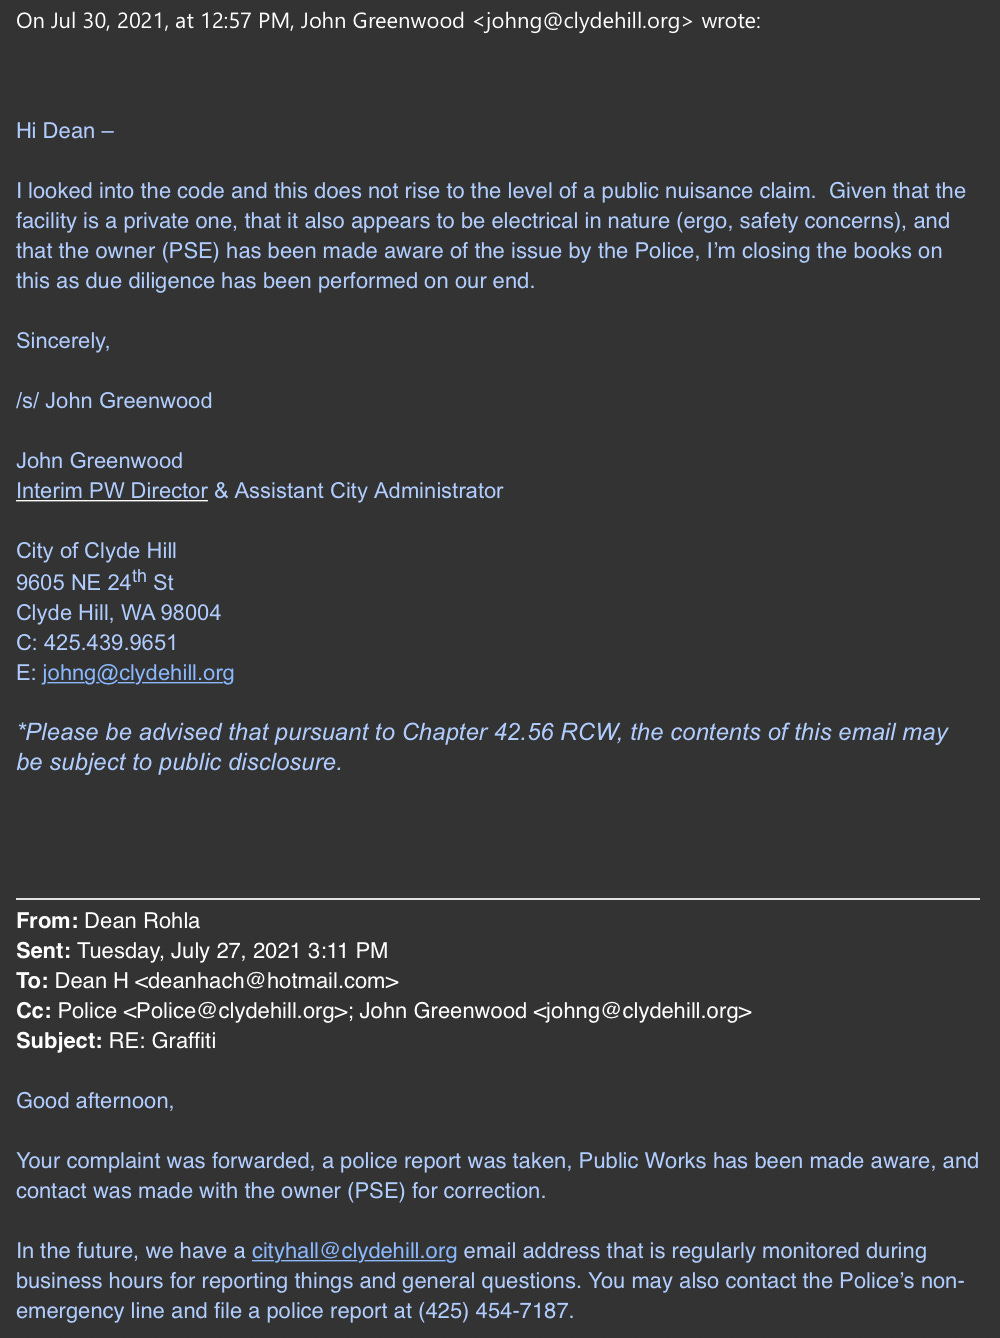 email from city: John Greenwood <johng@clydehill.org> wrote:  ﻿ Hi Dean –   I looked into the code and this does not rise to the level of a public nuisance claim.  Given that the facility is a private one, that it also appears to be electrical in nature (ergo, safety concerns), and that the owner (PSE) has been made aware of the issue by the Police, I’m closing the books on this as due diligence has been performed on our end. From: Dean Rohla  Sent: Tuesday, July 27, 2021 3:11 PM To: Dean H <deanhach@hotmail.com> Cc: Police <Police@clydehill.org>; John Greenwood <johng@clydehill.org> Subject: RE: Graffiti   Good afternoon,   Your complaint was forwarded, a police report was taken, Public Works has been made aware, and contact was made with the owner (PSE) for correction.